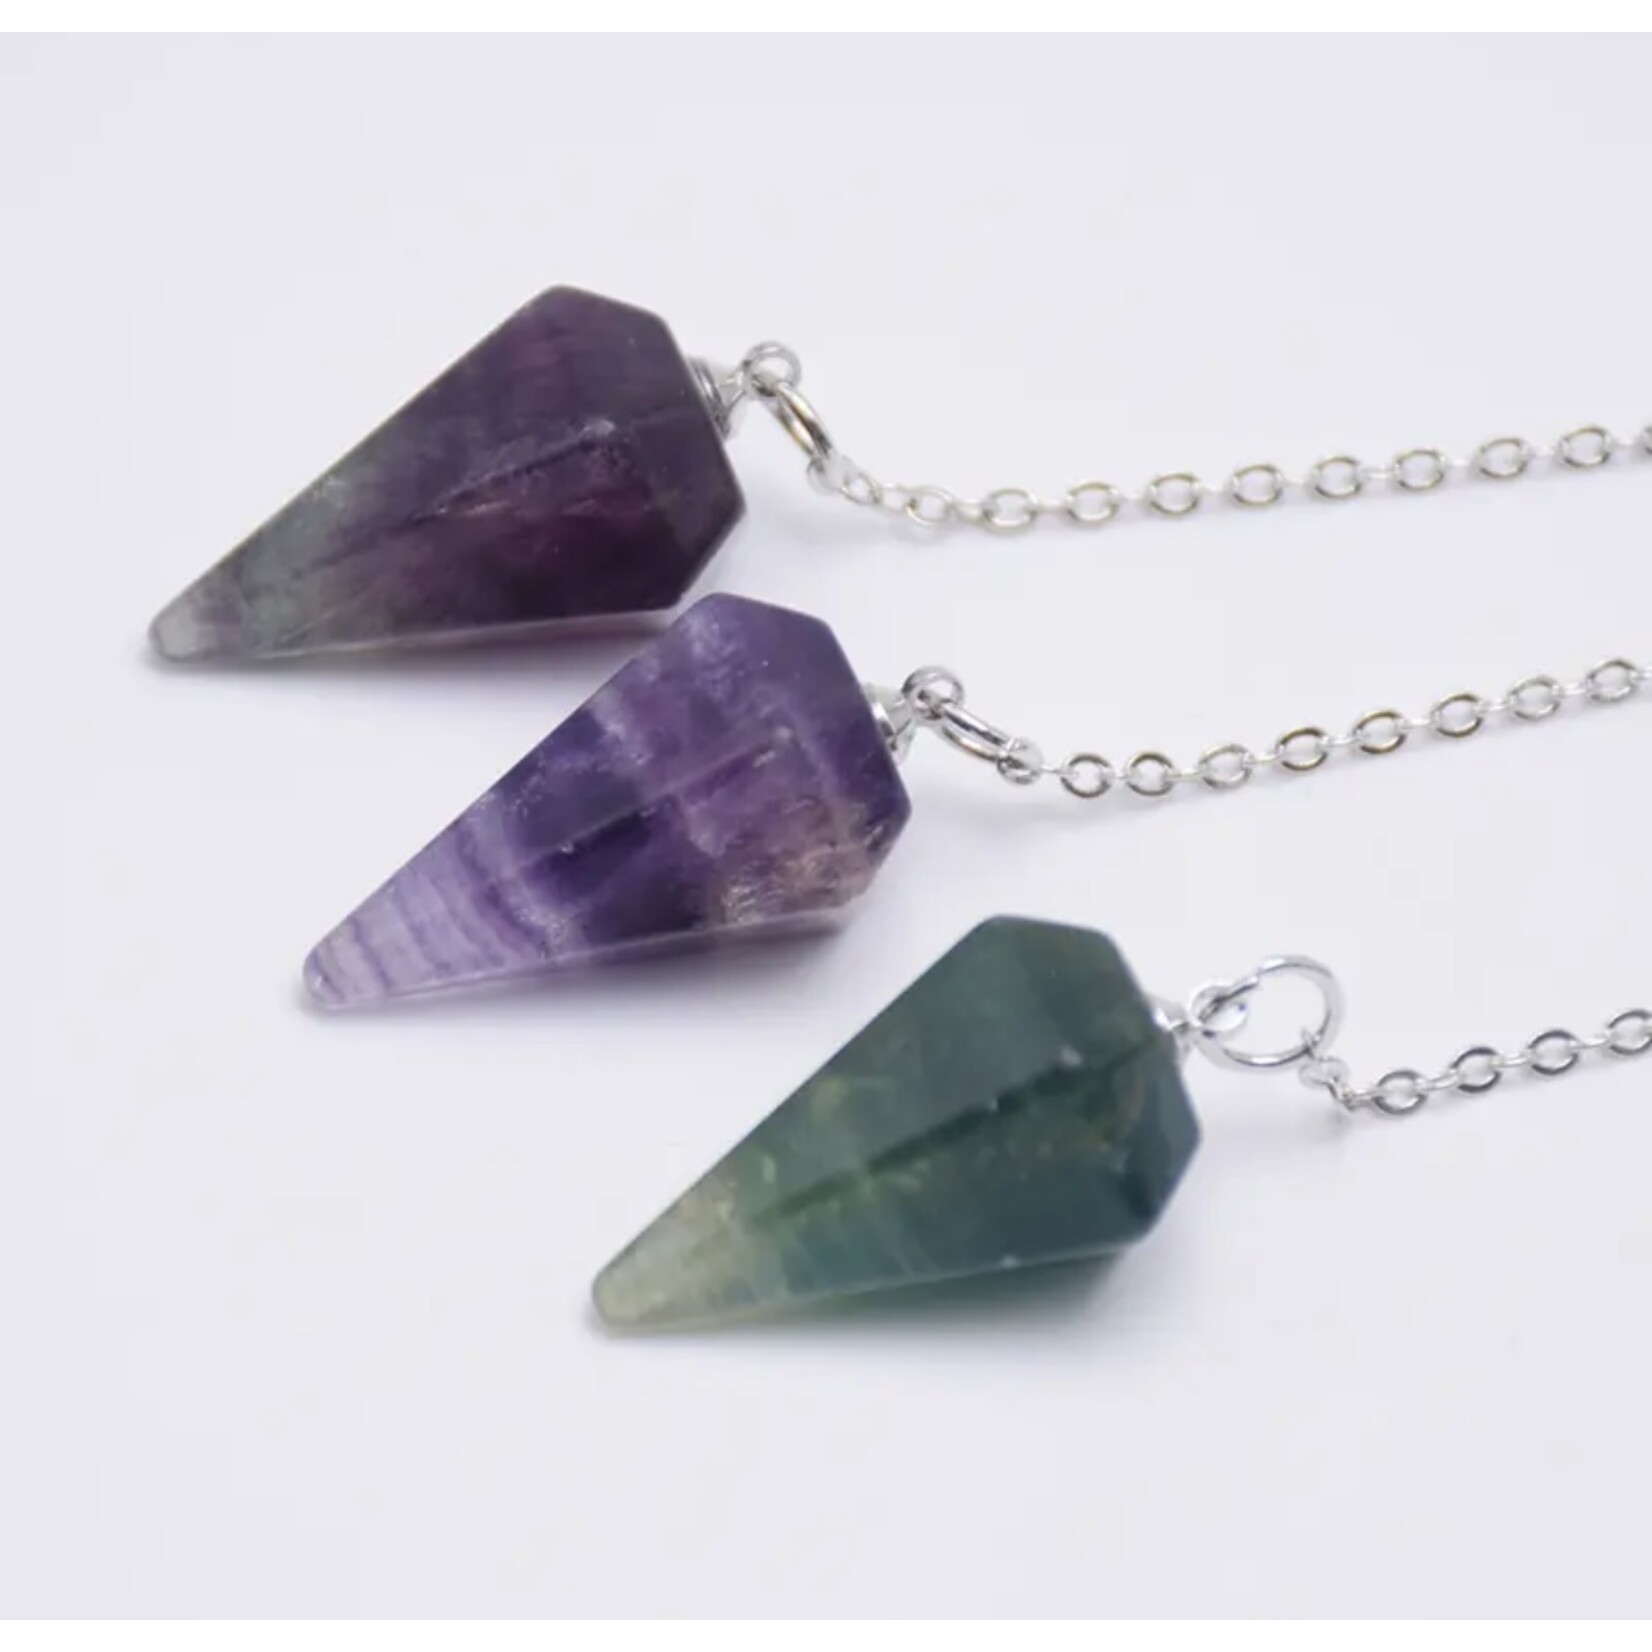 Compact Hexagonal Crystal Pendulum- Ideal for Chakra Healing, Dowsing, and Energy Alignment